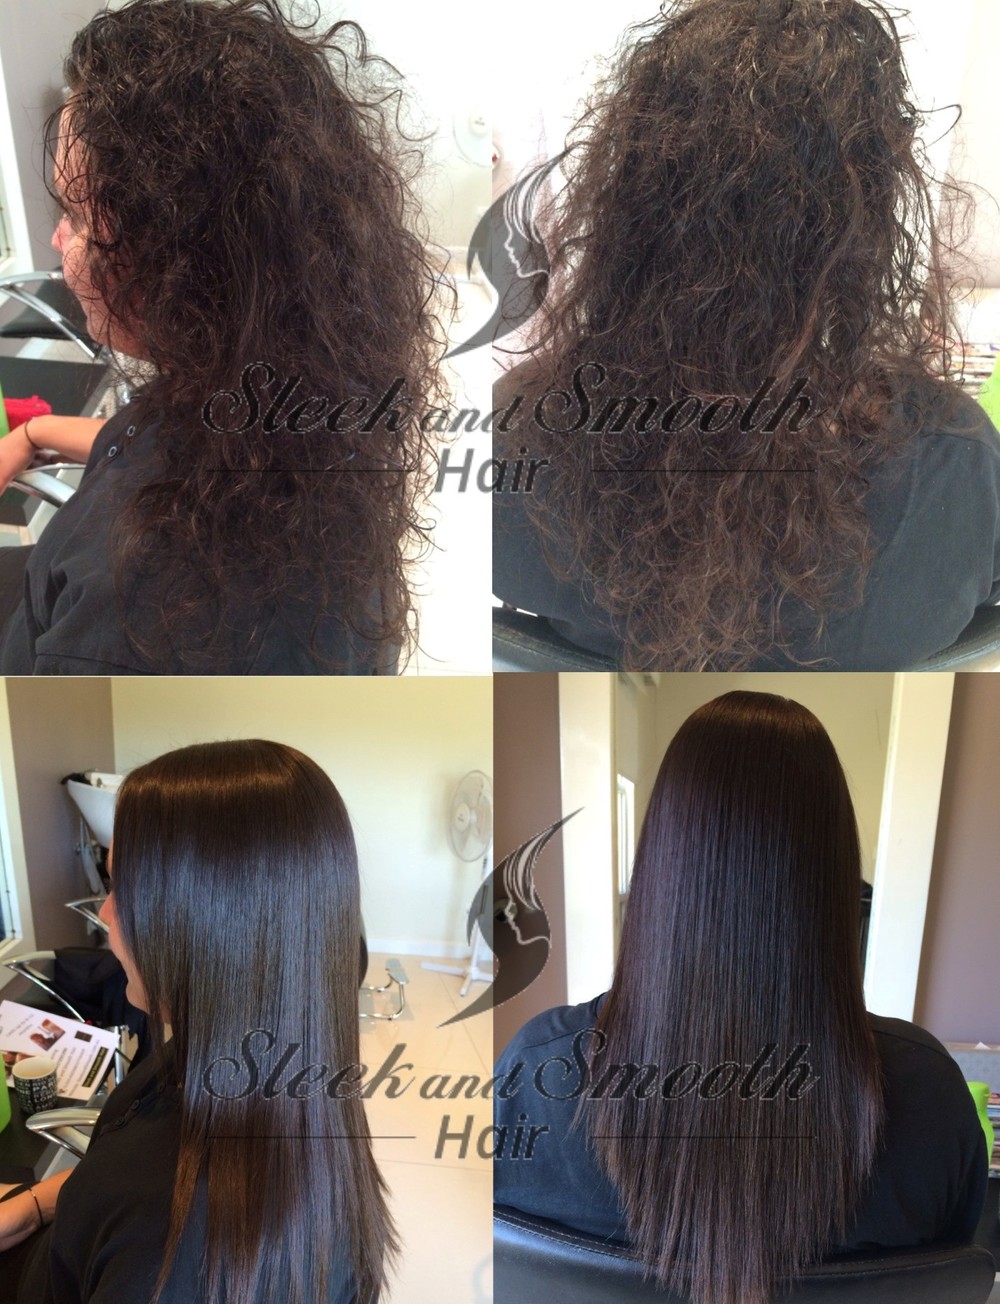 Before & After Photo Gallery — Sleek and Smooth Hair